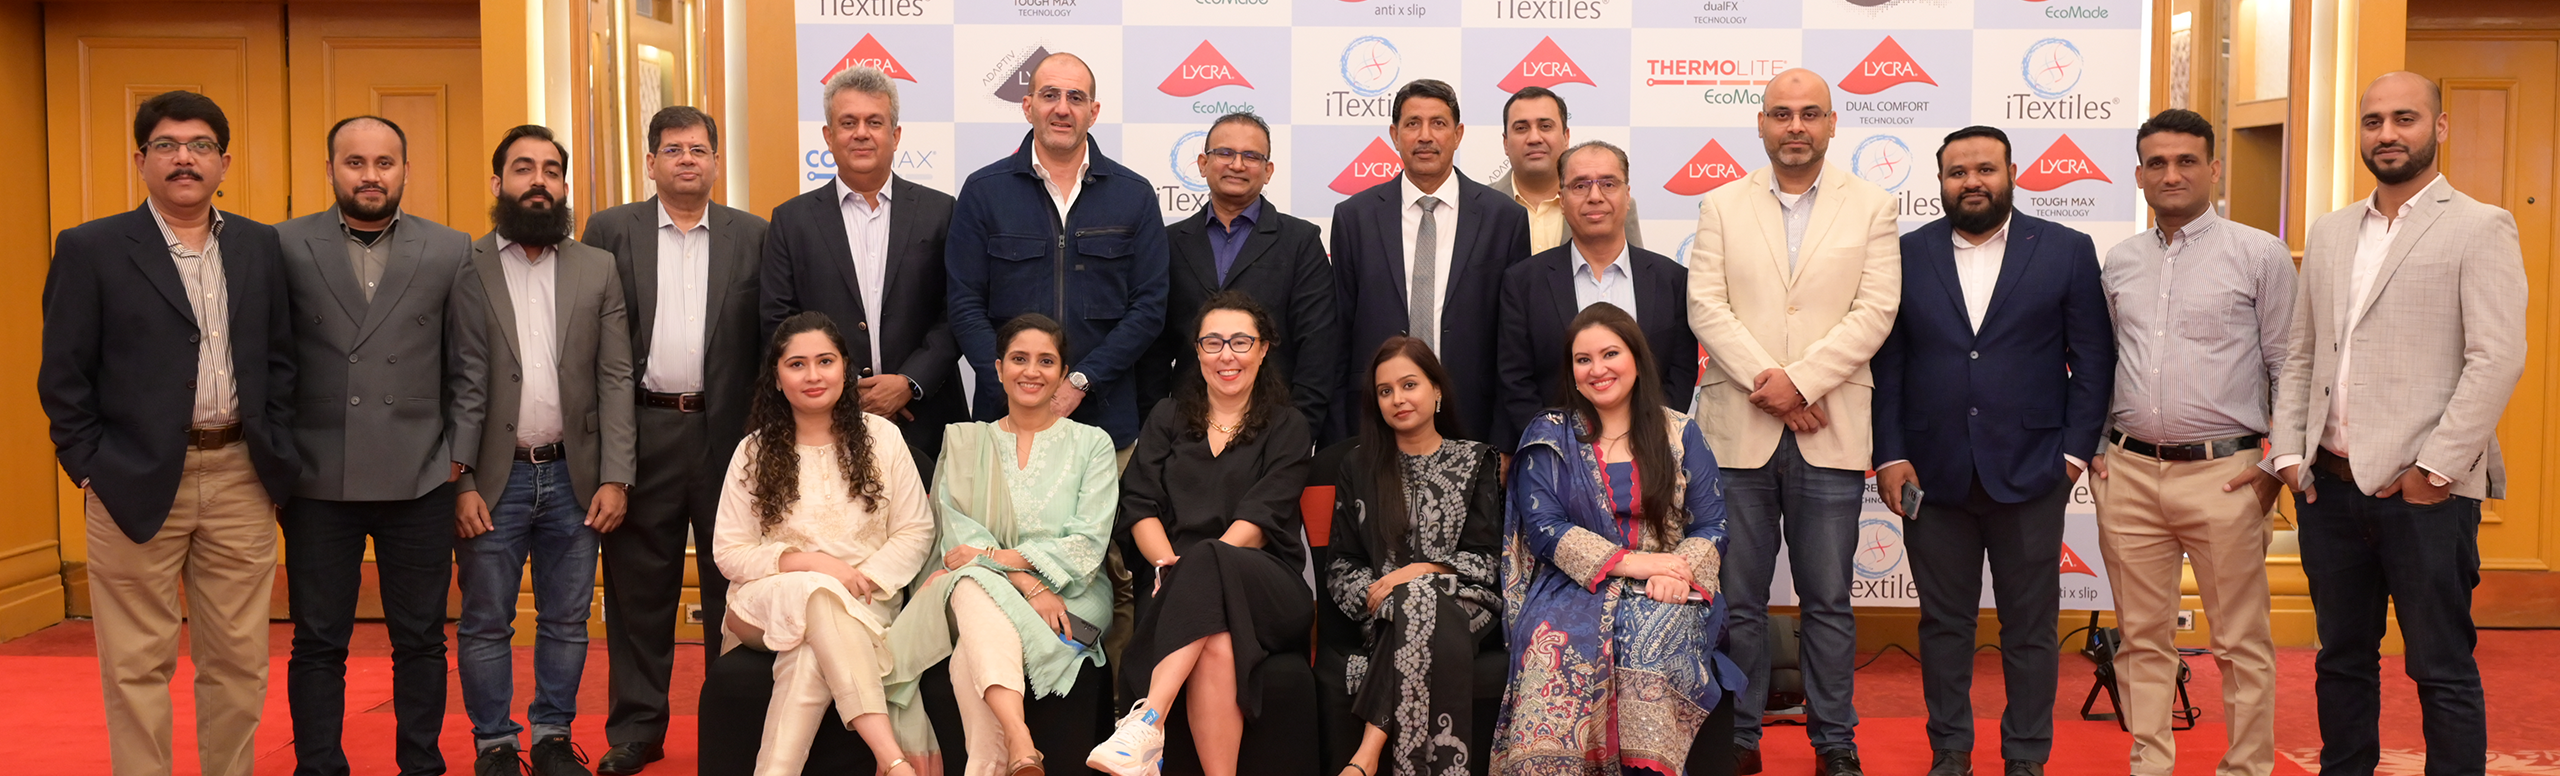  iTextiles® Welcomes representatives from The LYCRA Company to Pakistan